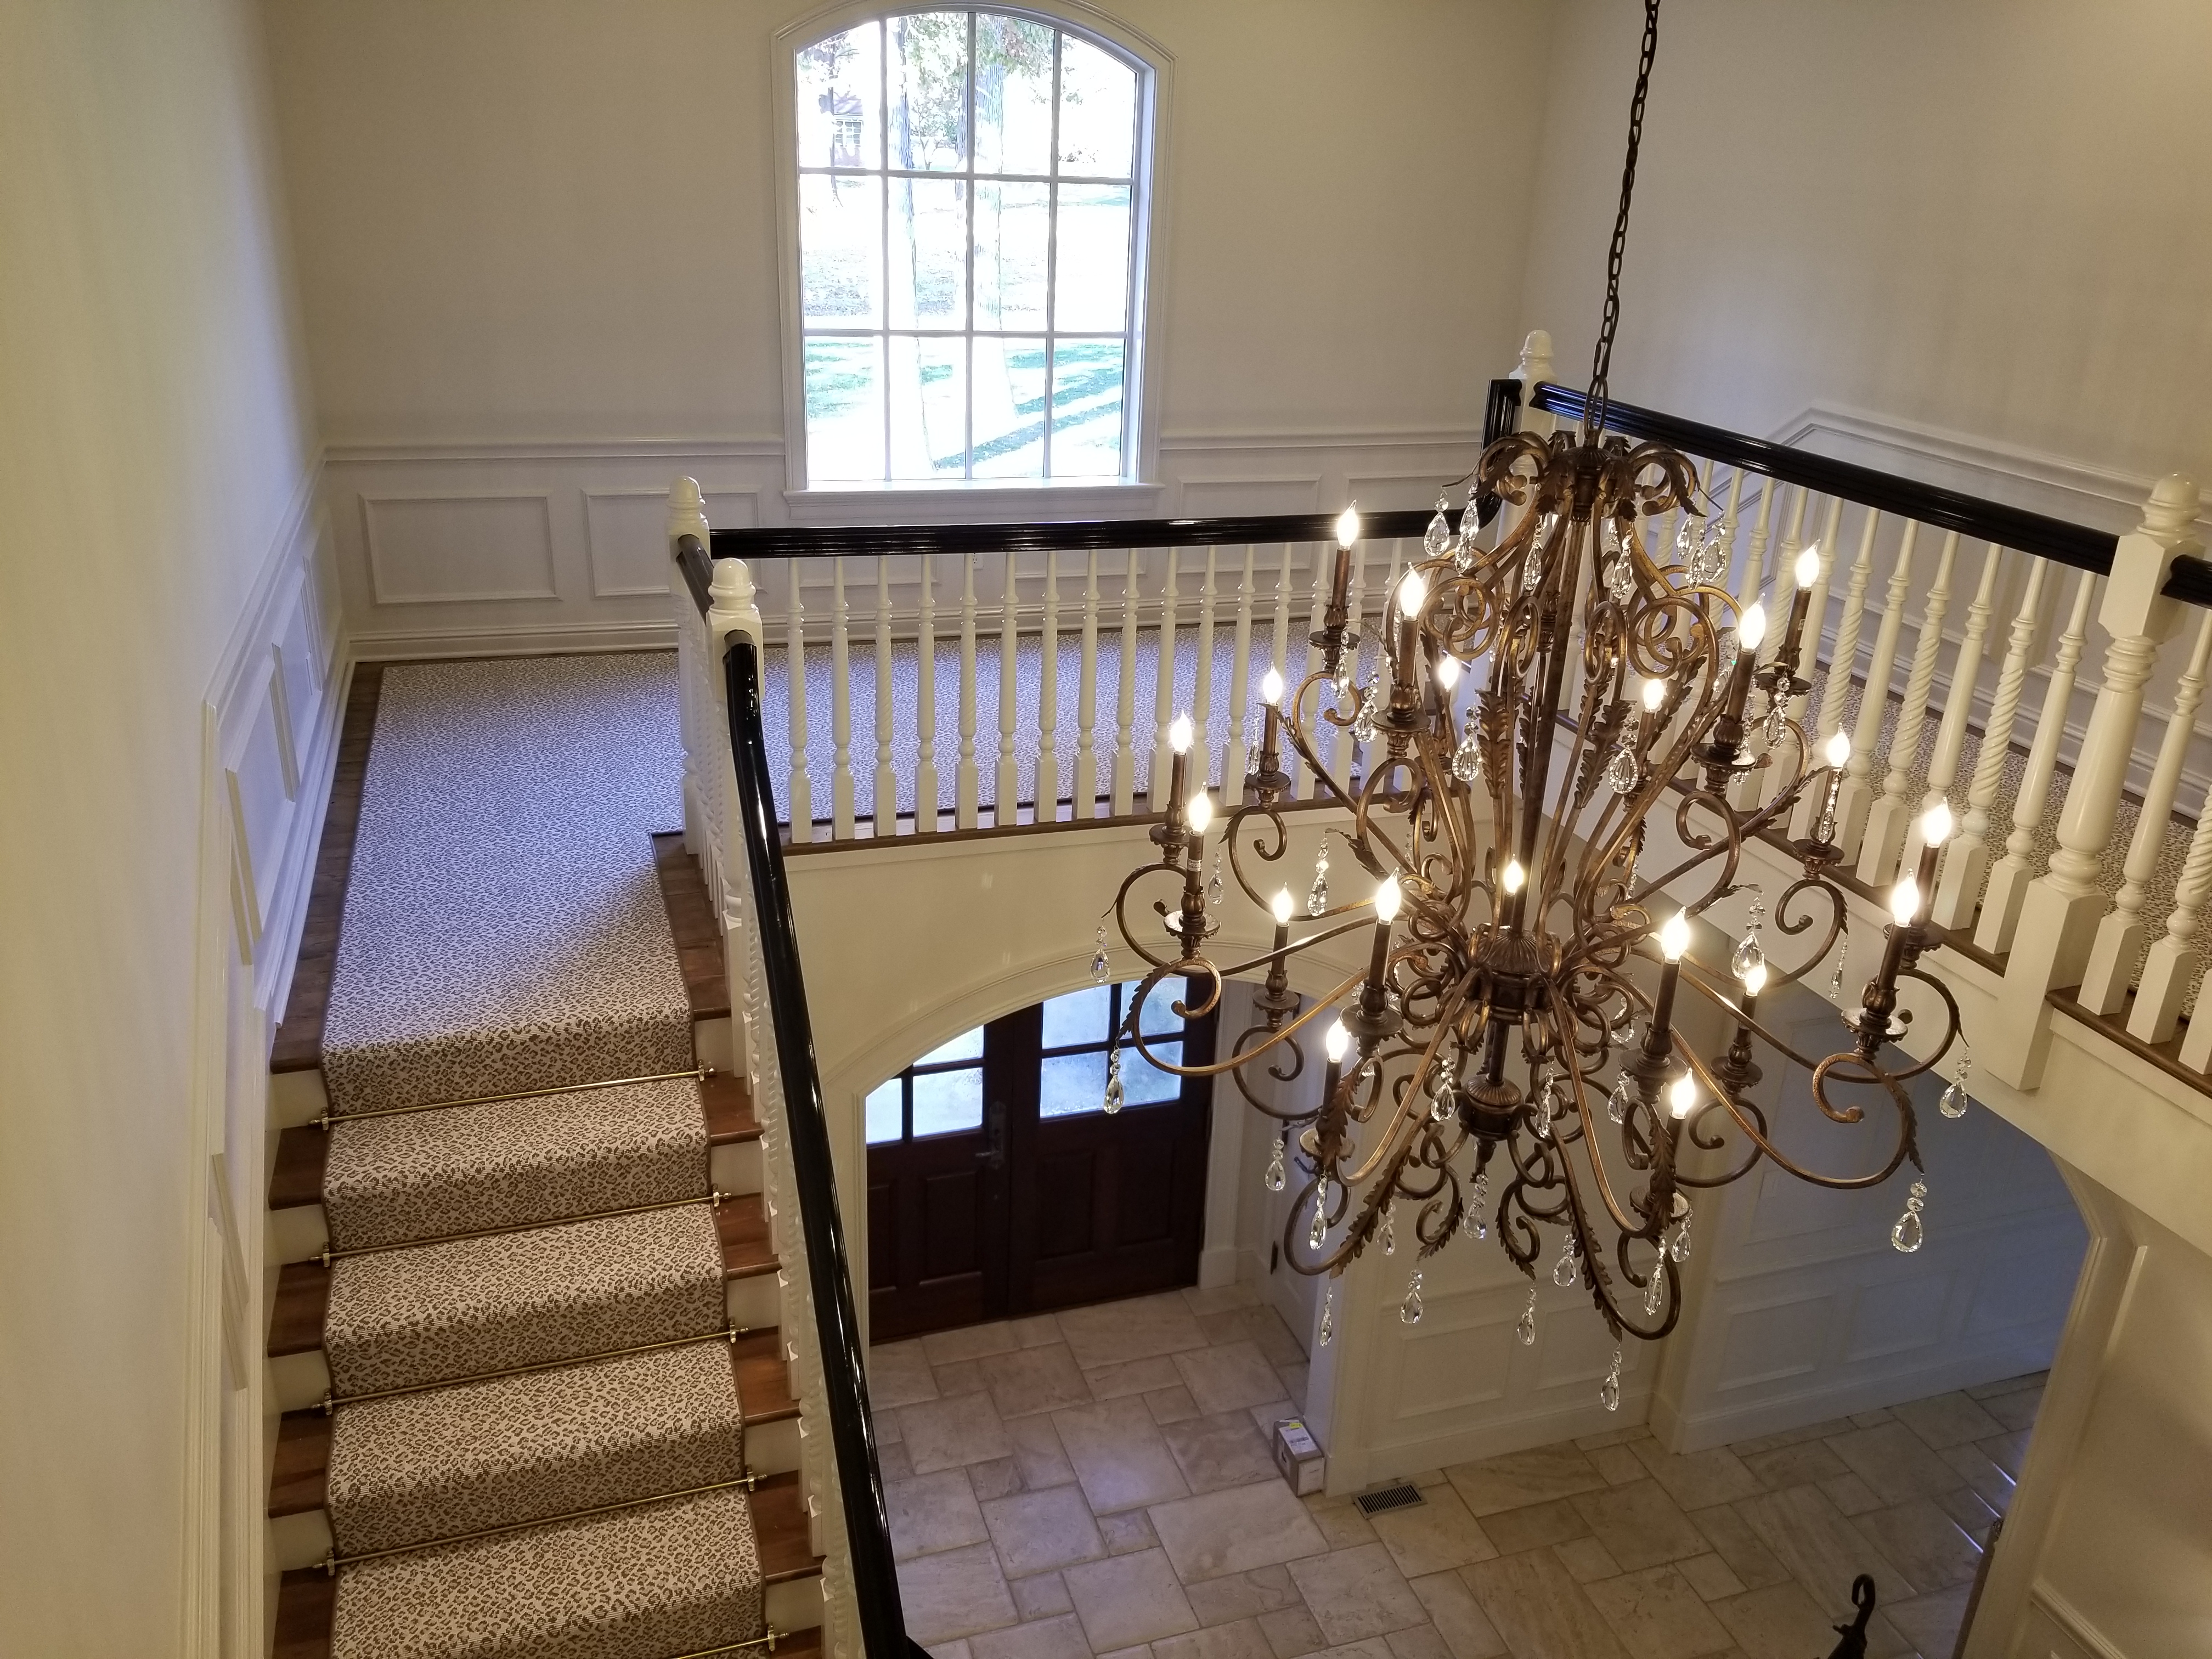 A chandelier hanging from the ceiling in front of stairs.